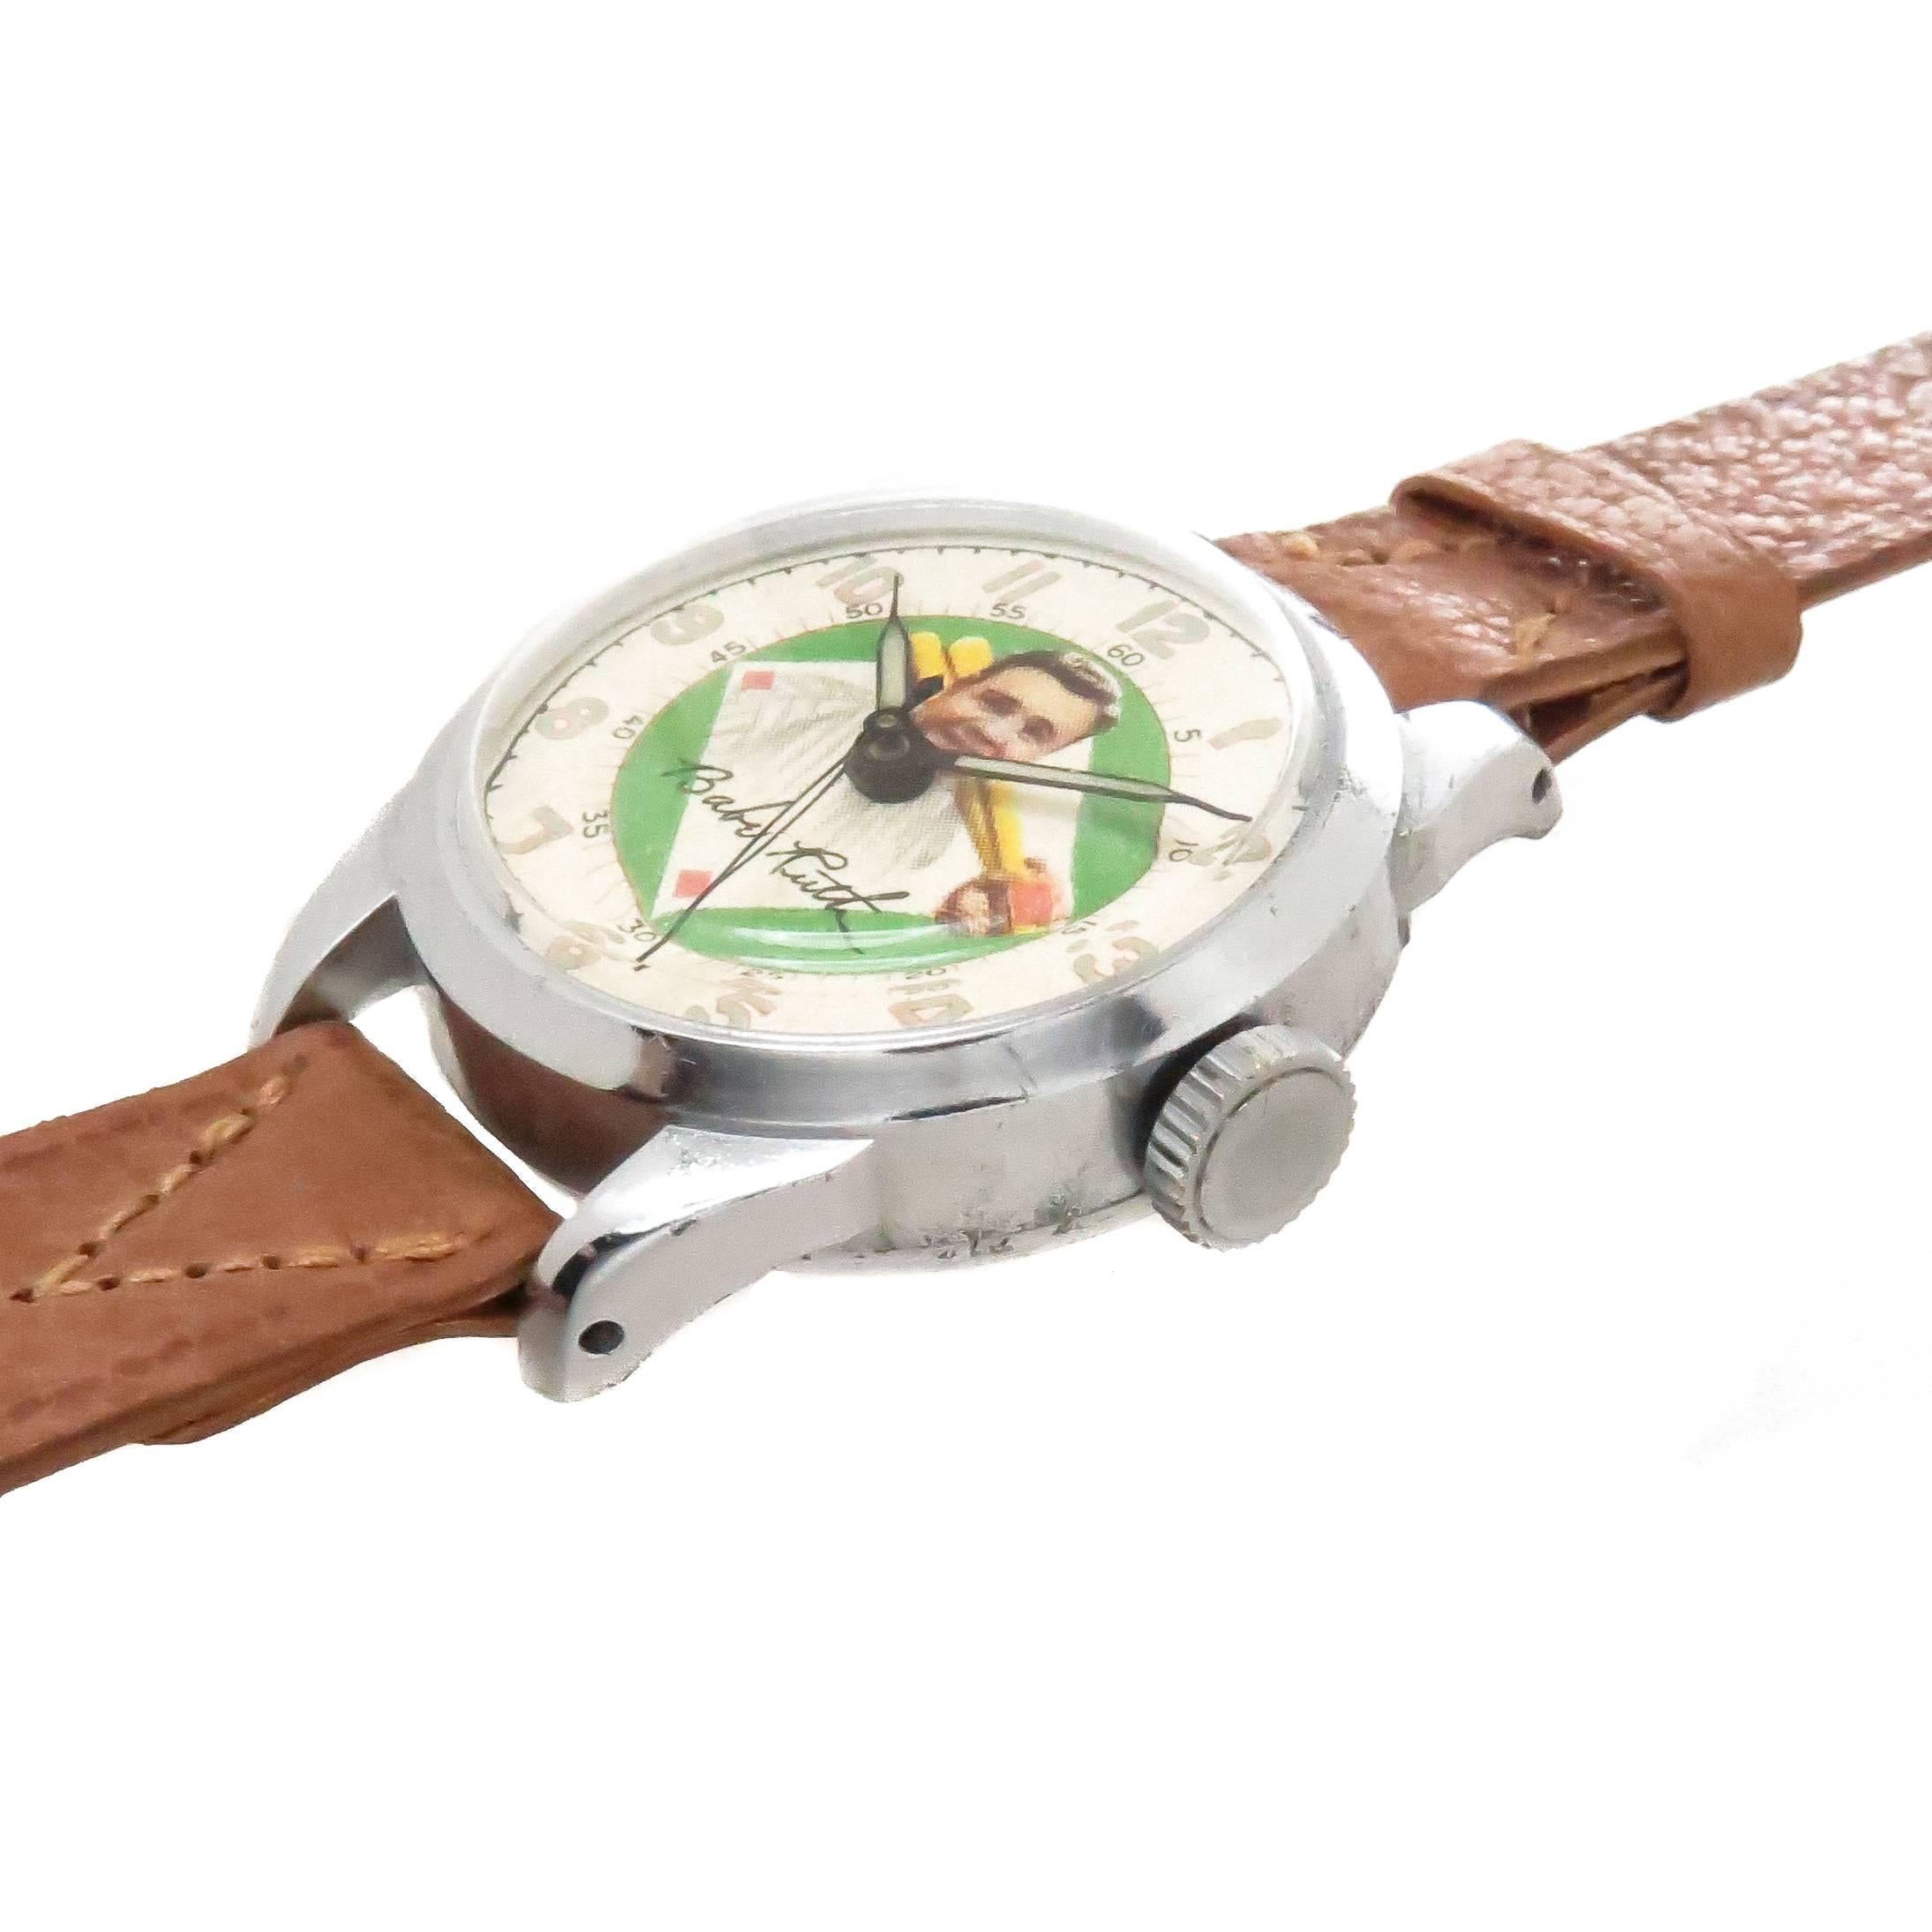 Circa 1948 Exacta Time Corporation Babe Ruth Wrist Watch, 33 MM Chromed Steel 2 piece case. Mechanical, manual wind pin lever movement. Very Bright and colorful Lithographed Dial with Luminous hands and a sweep seconds hand. The watch comes on a new